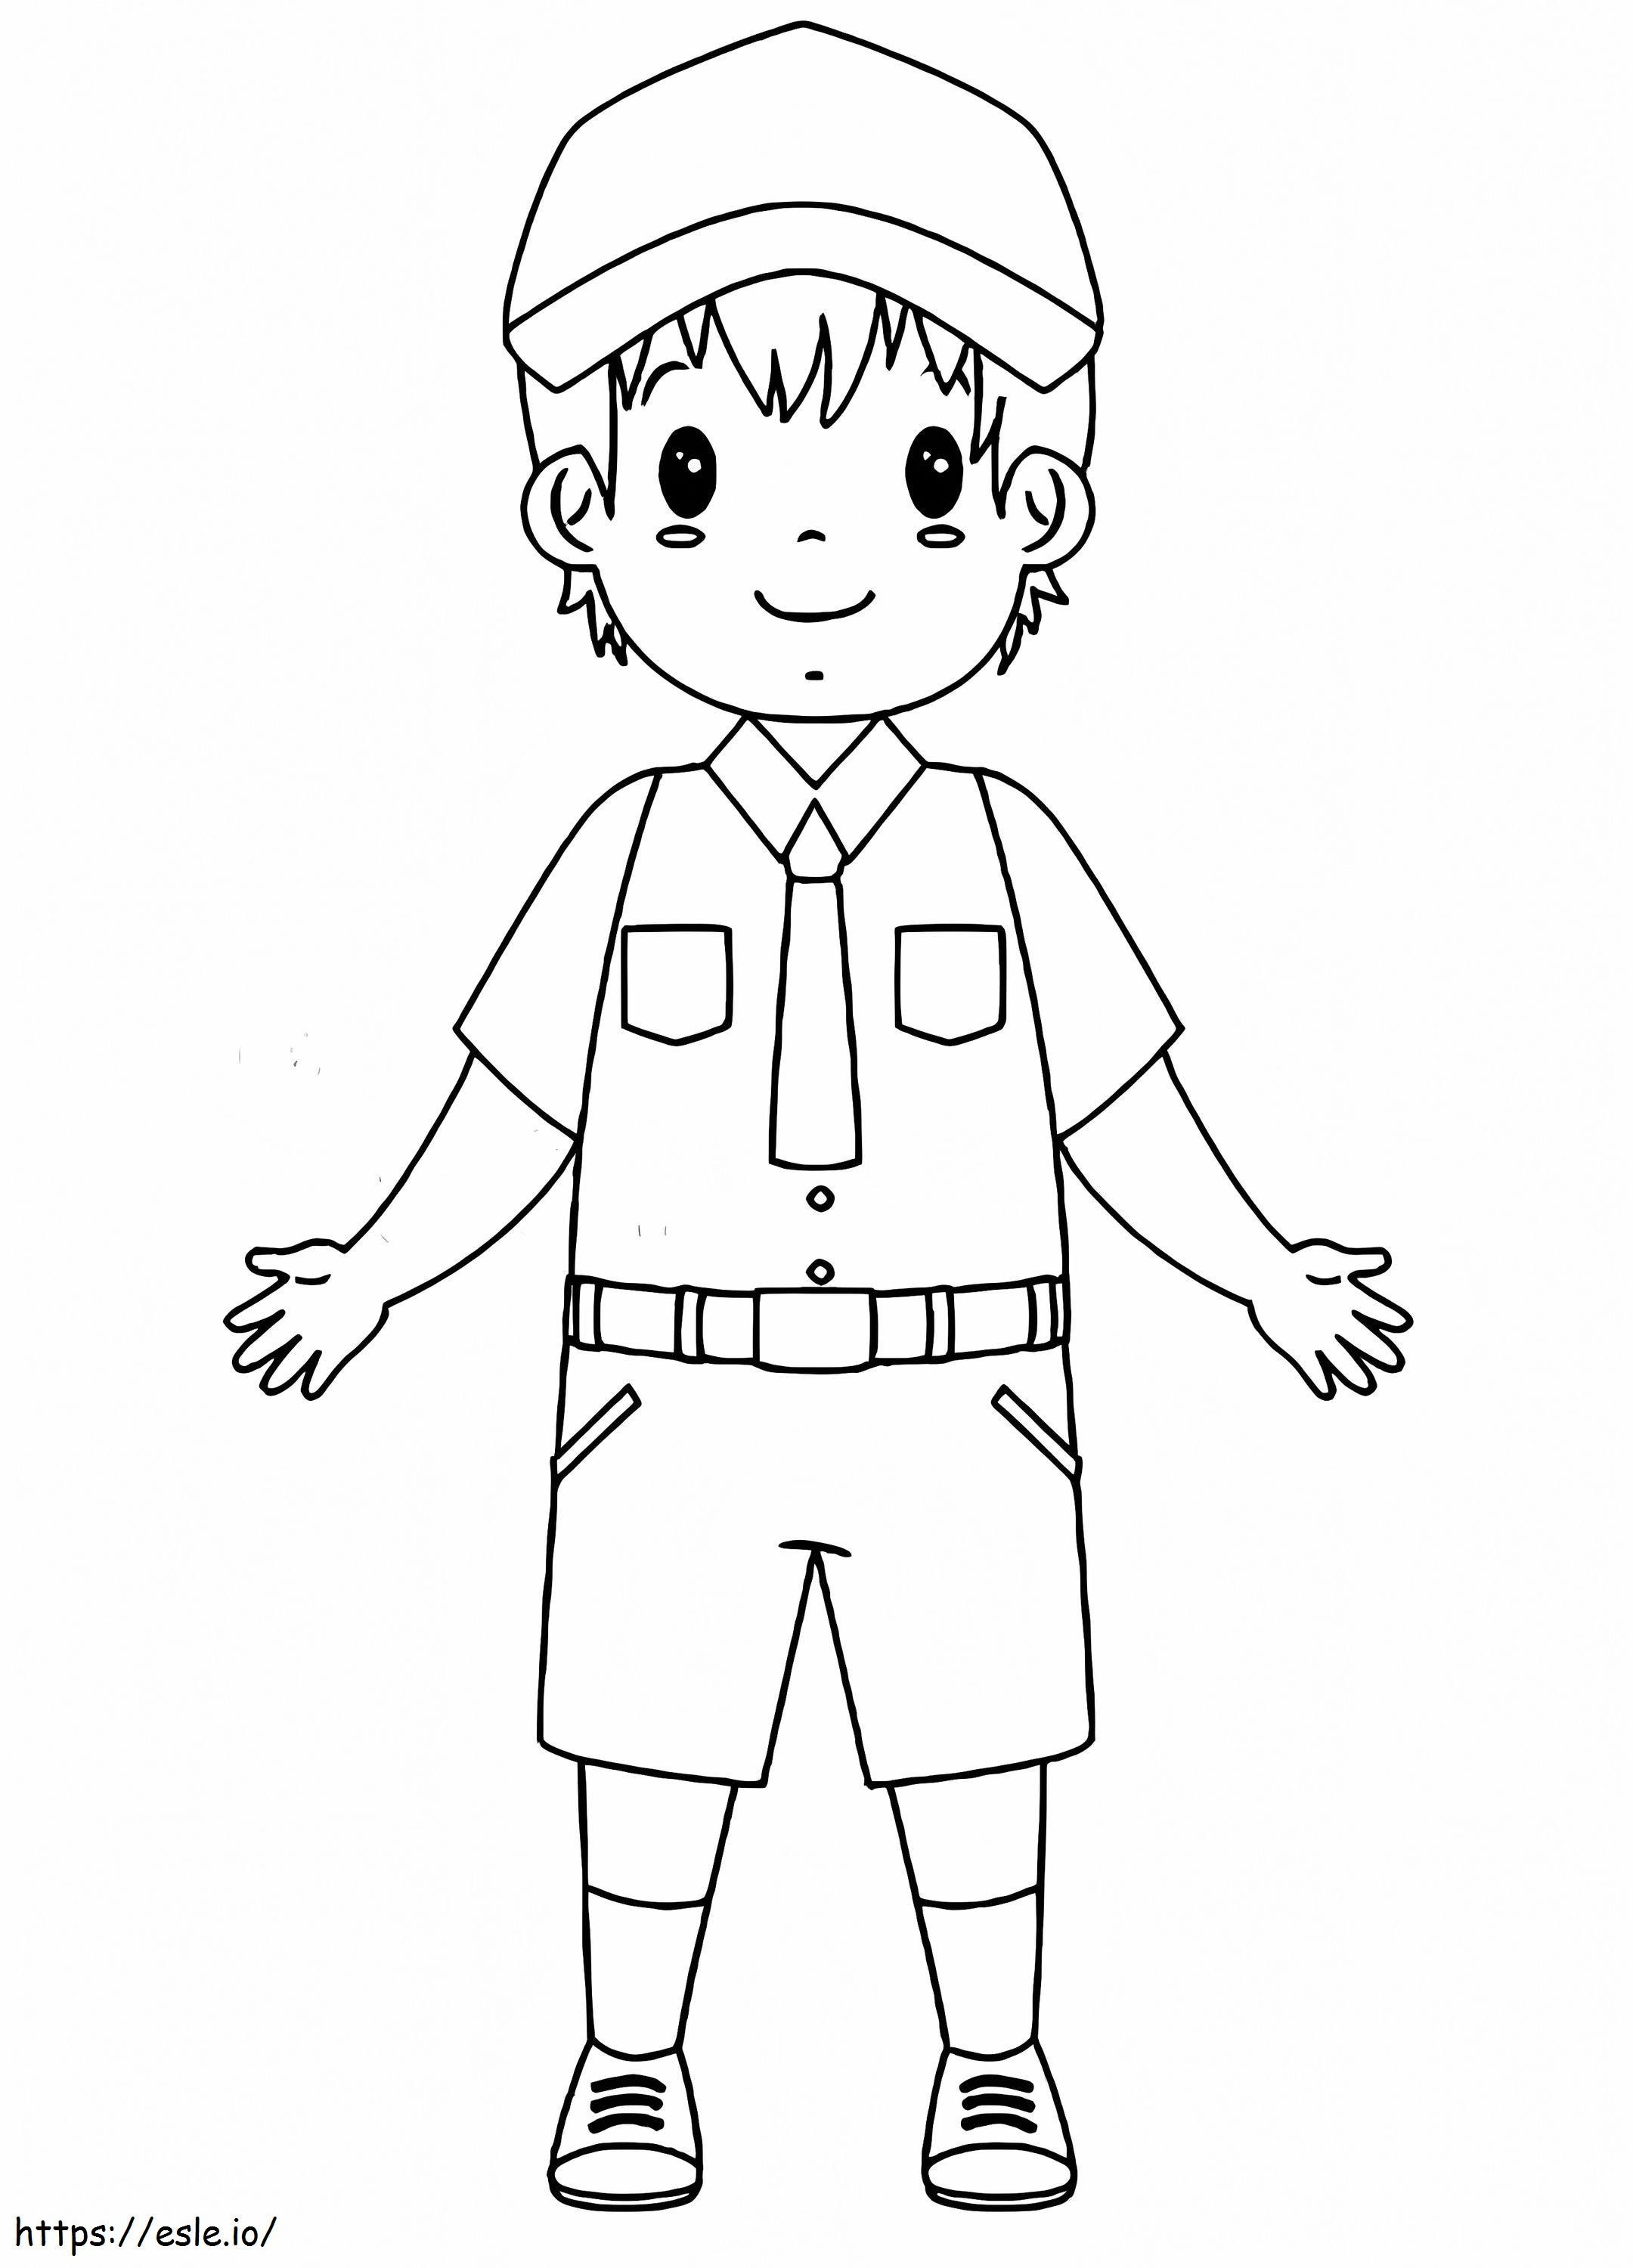 Indonesian Student coloring page